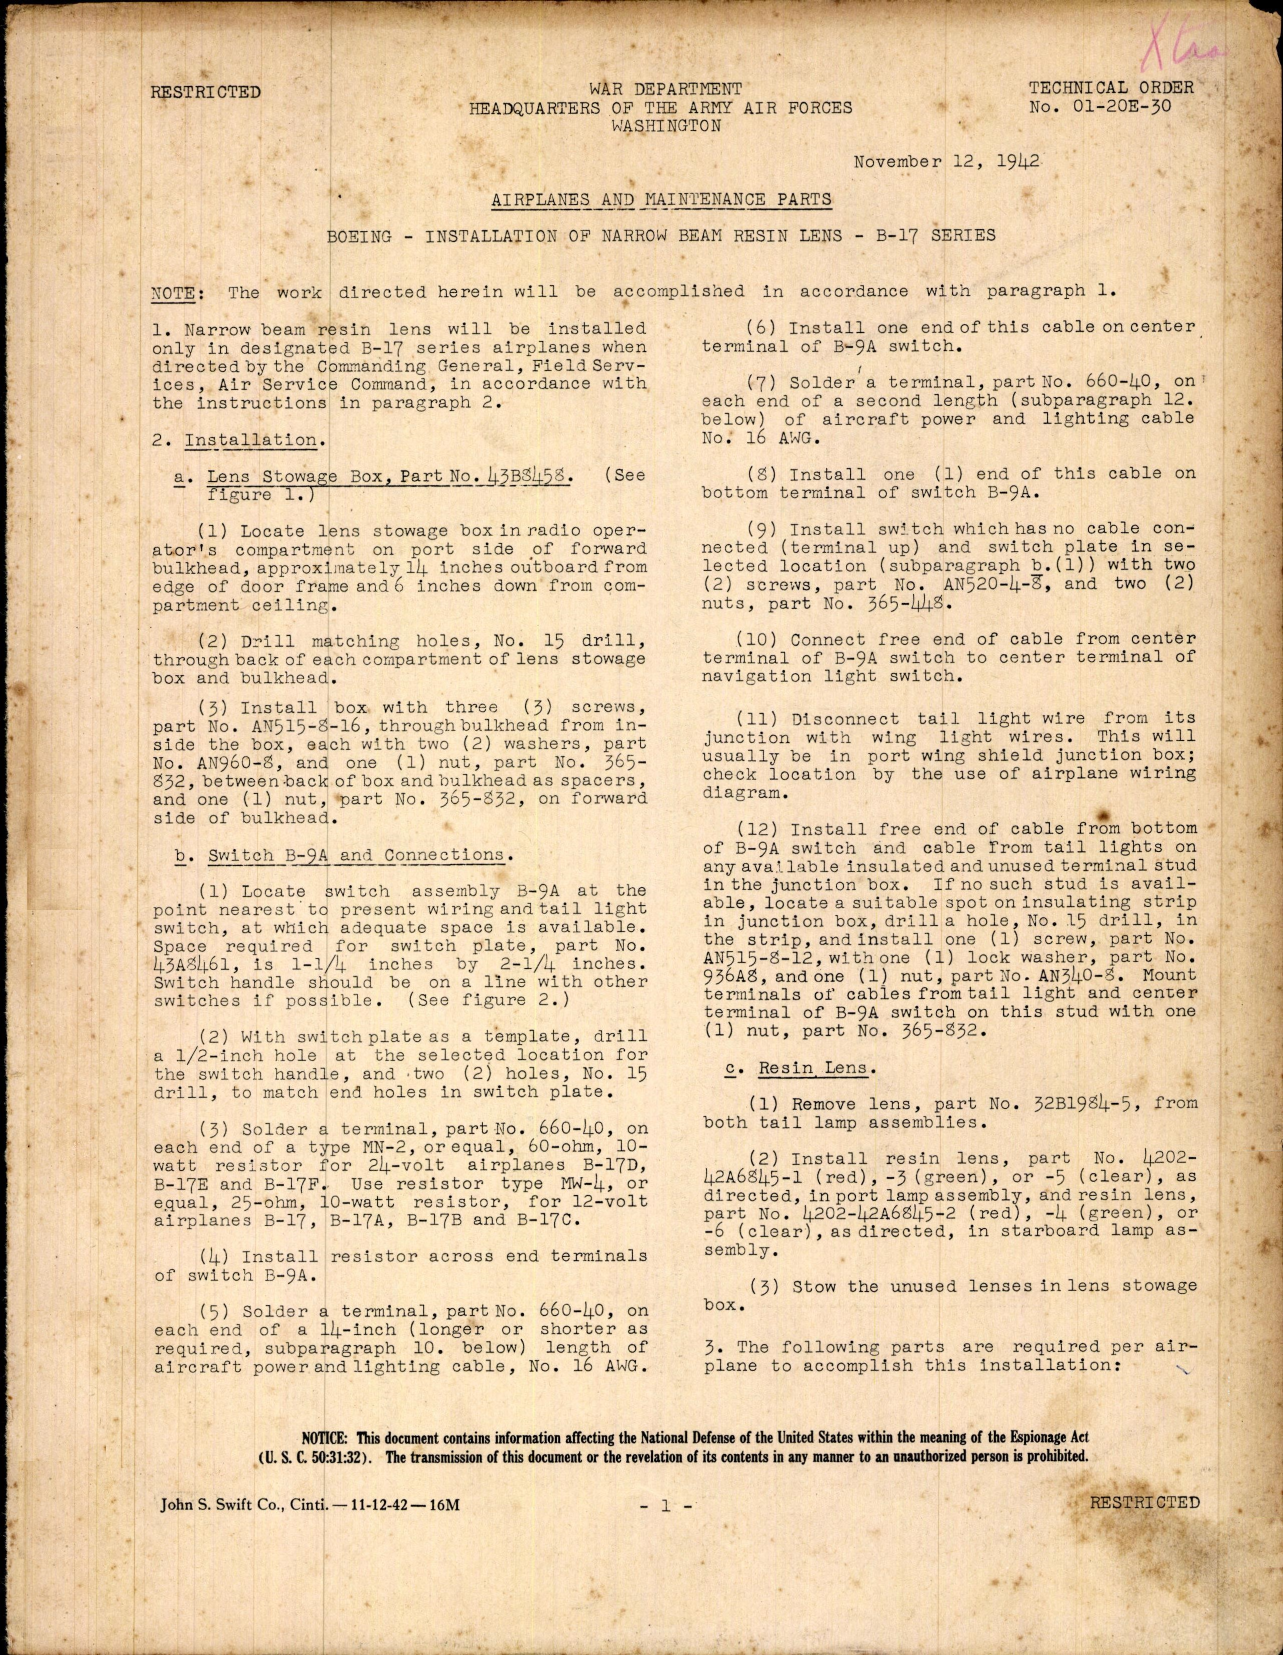 Sample page 1 from AirCorps Library document: Installation of Narrow Beam Resin Lens for B-17 Series